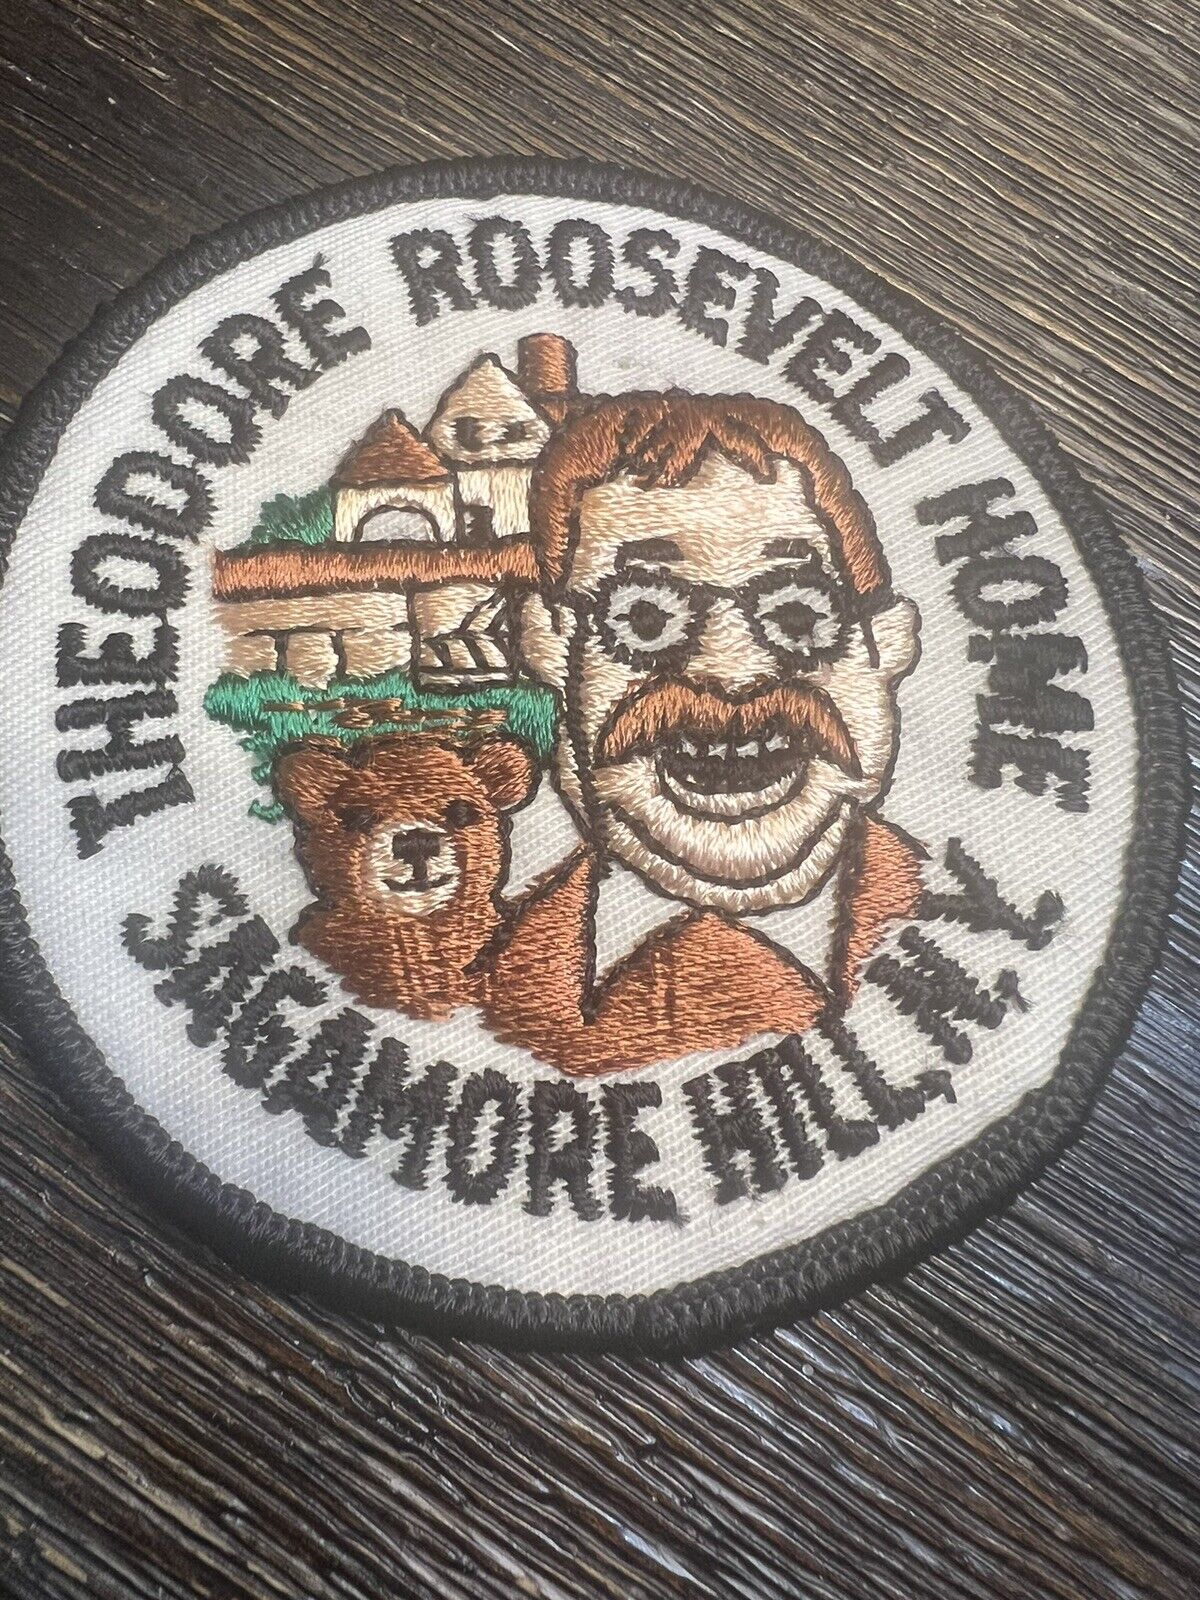 Vintage Theodore Roosevelt Home Patch Sagamore Hills NY Rare Collectors Item